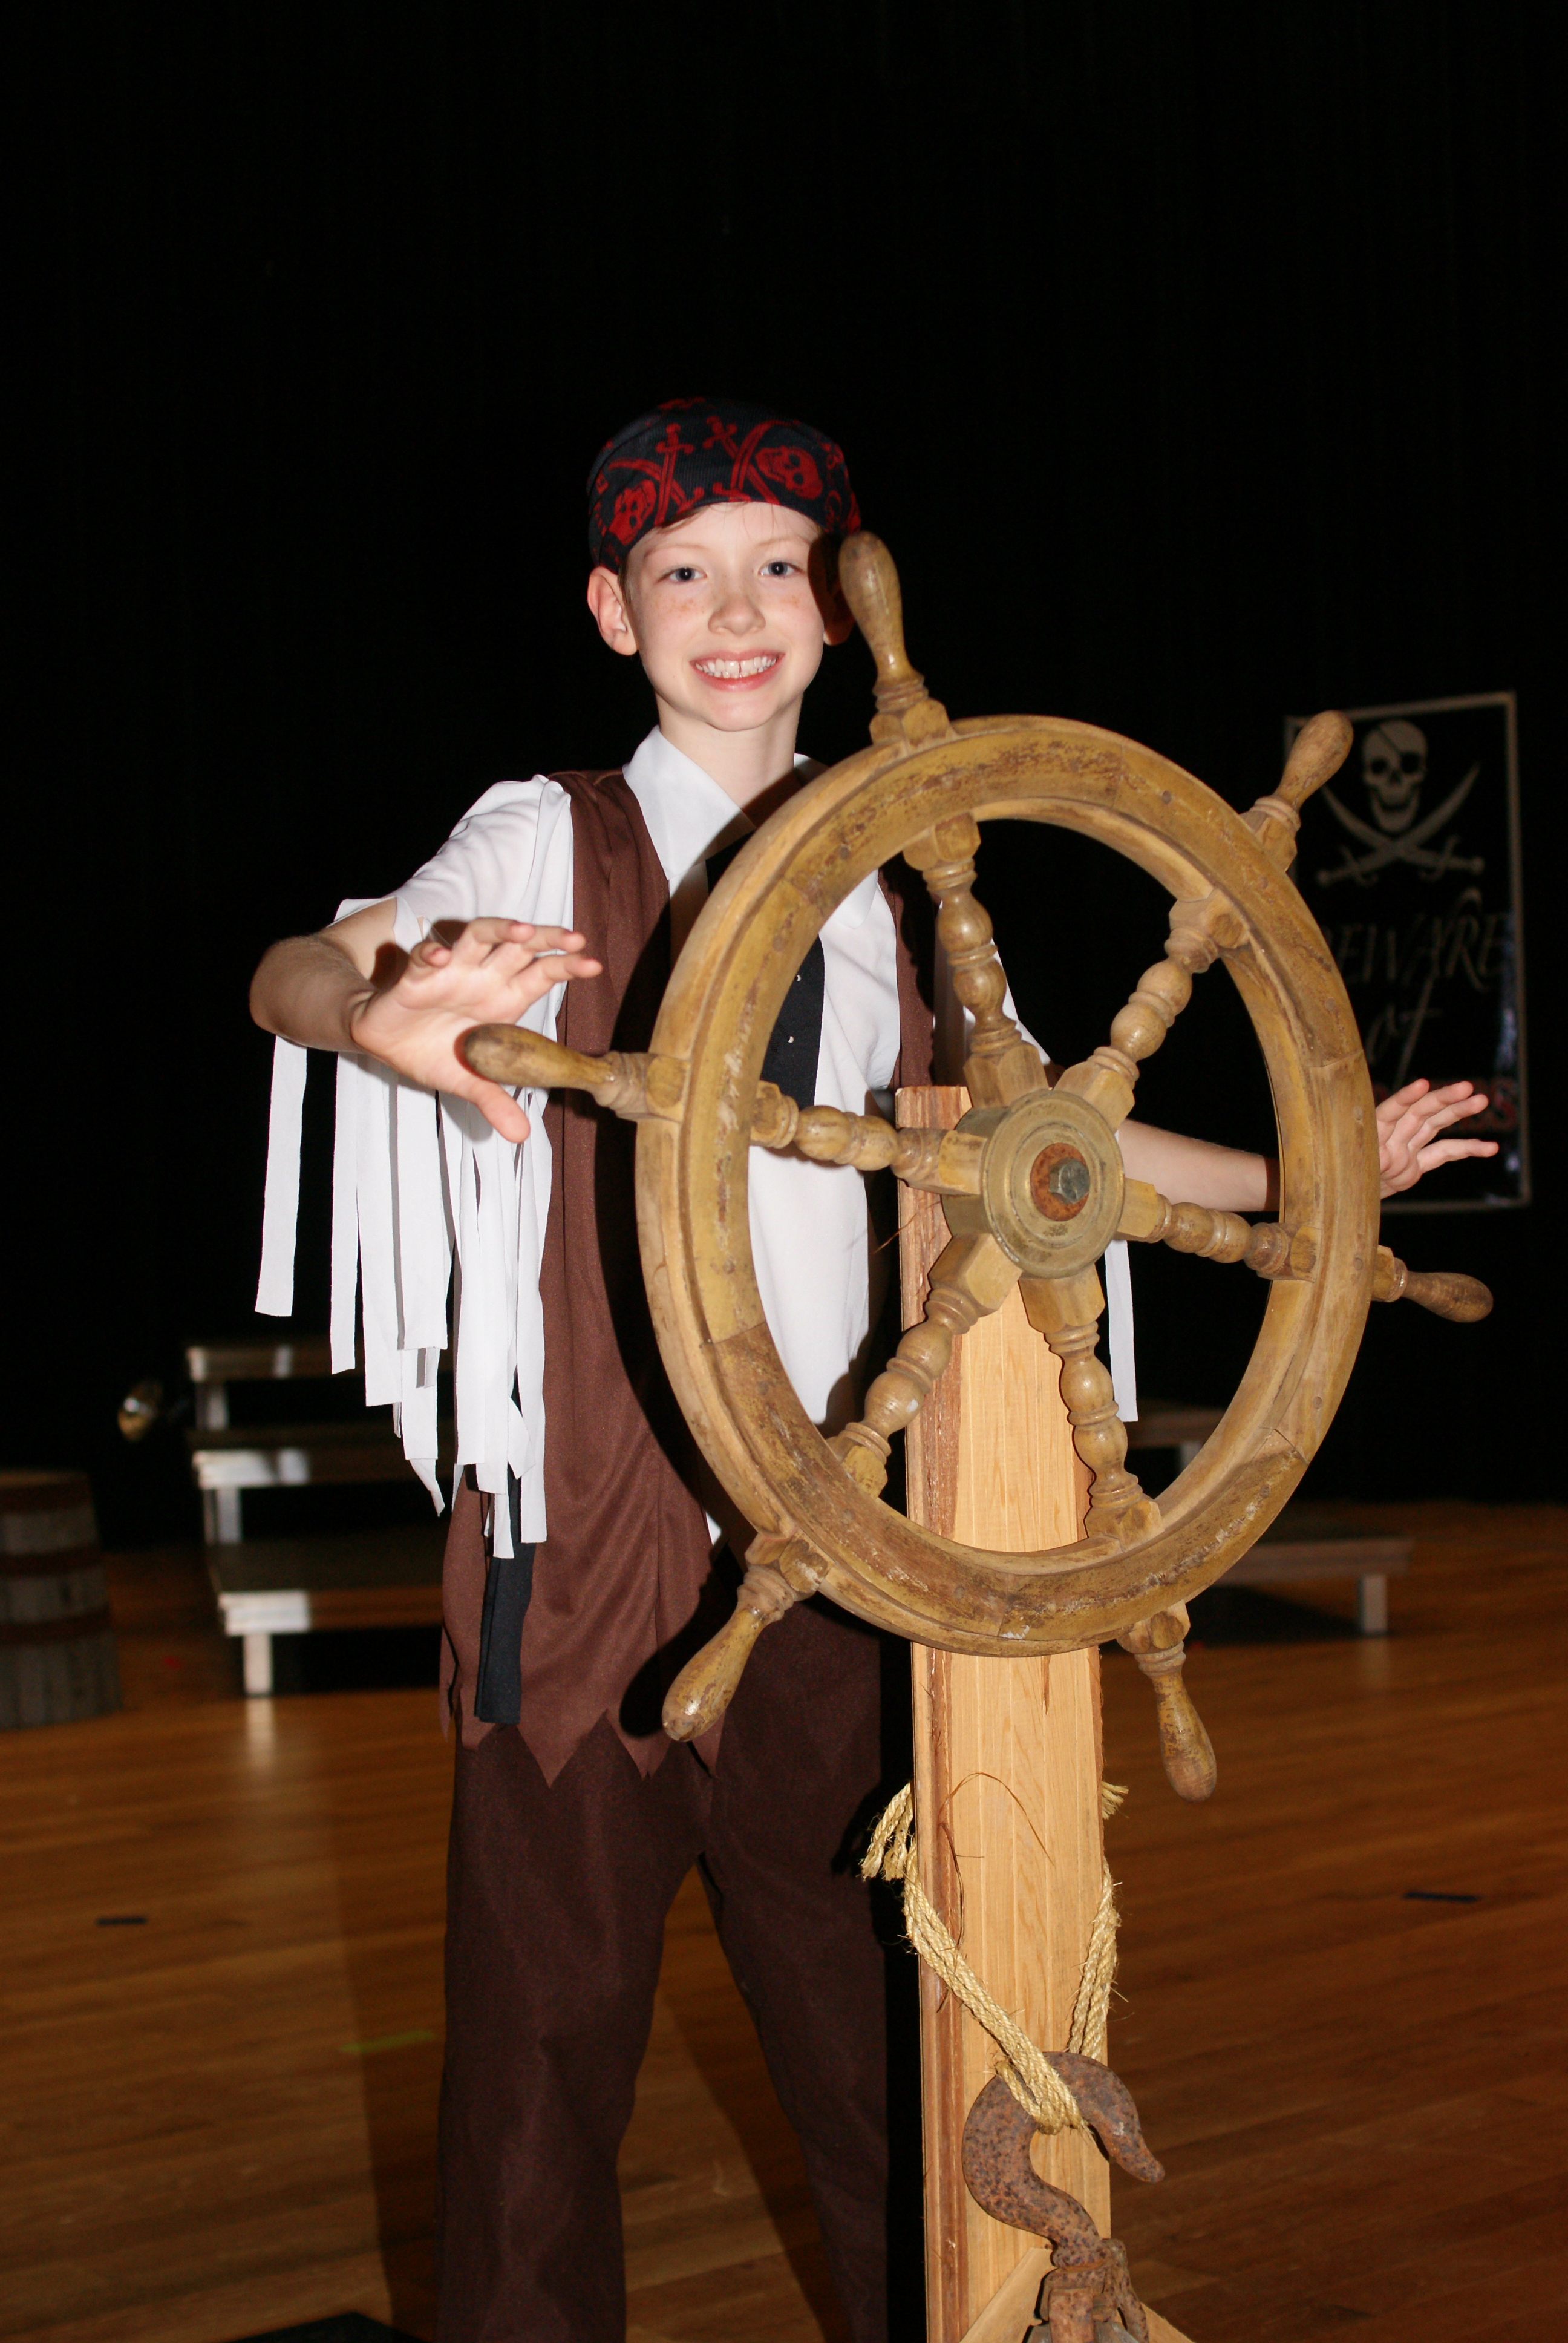 Zach as the lead role in Pirates! The Musical.